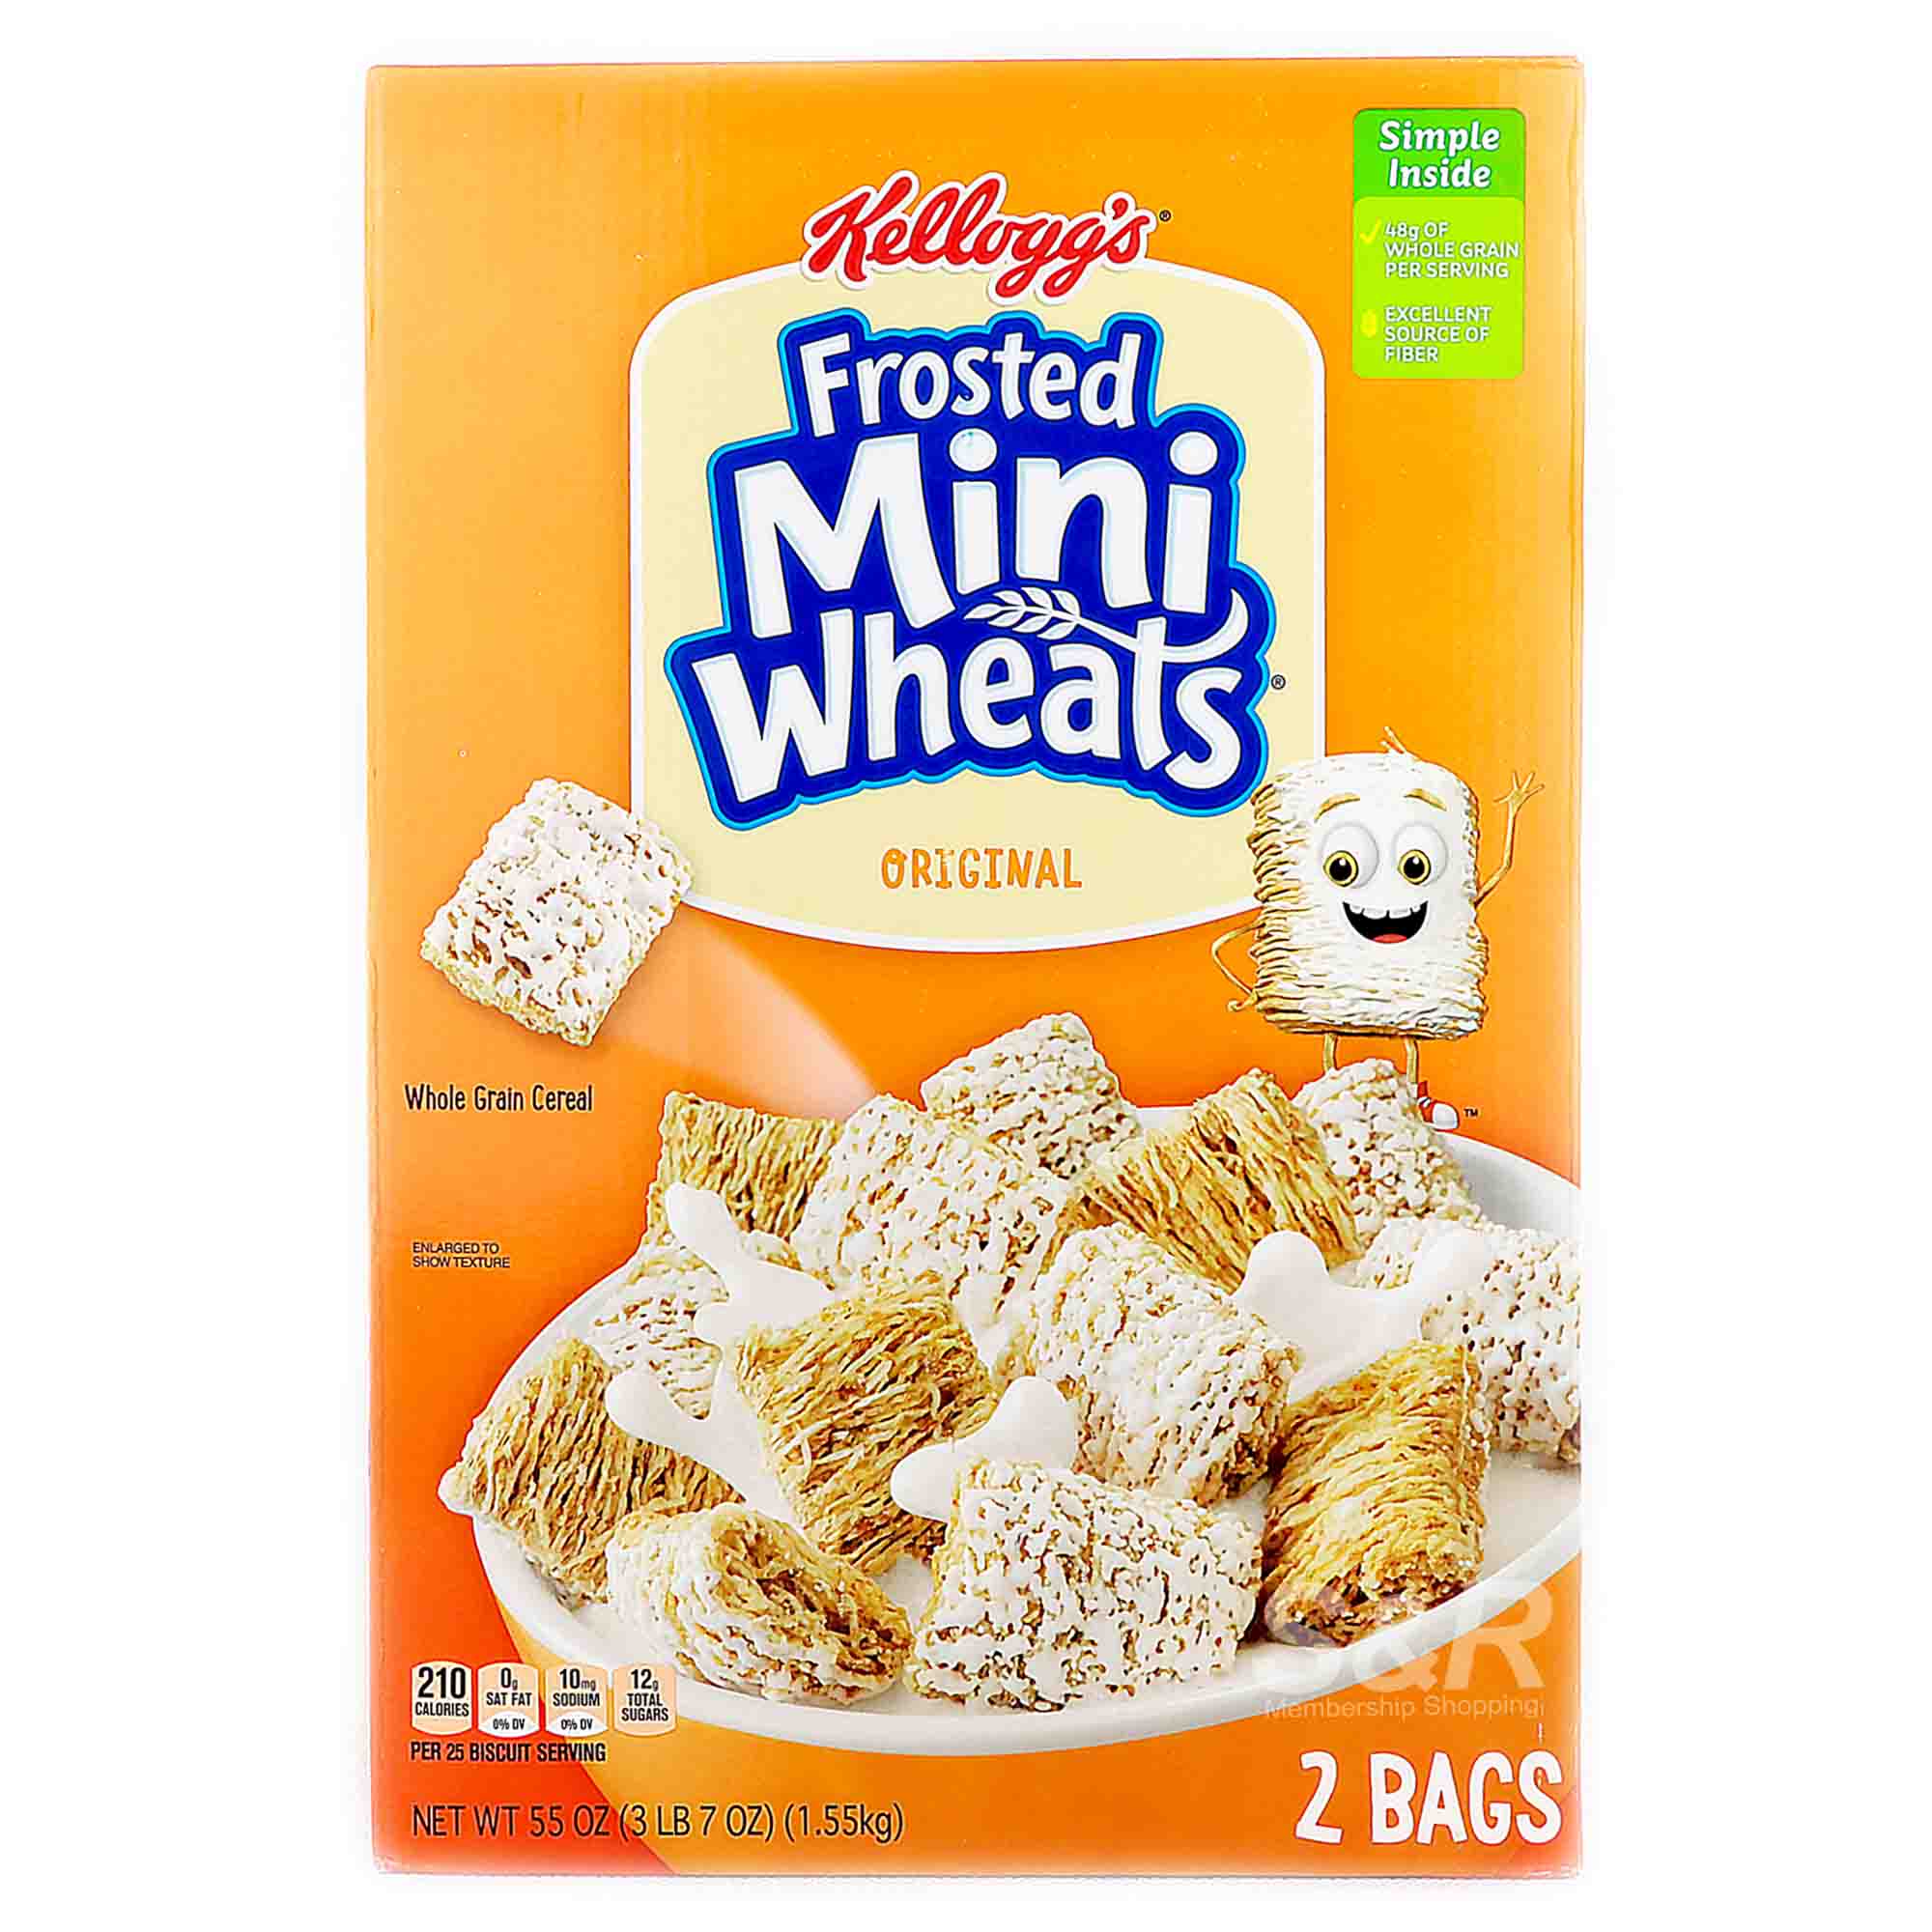 Kellogg's Frosted Mini Wheats Original Cereal 1.55kg